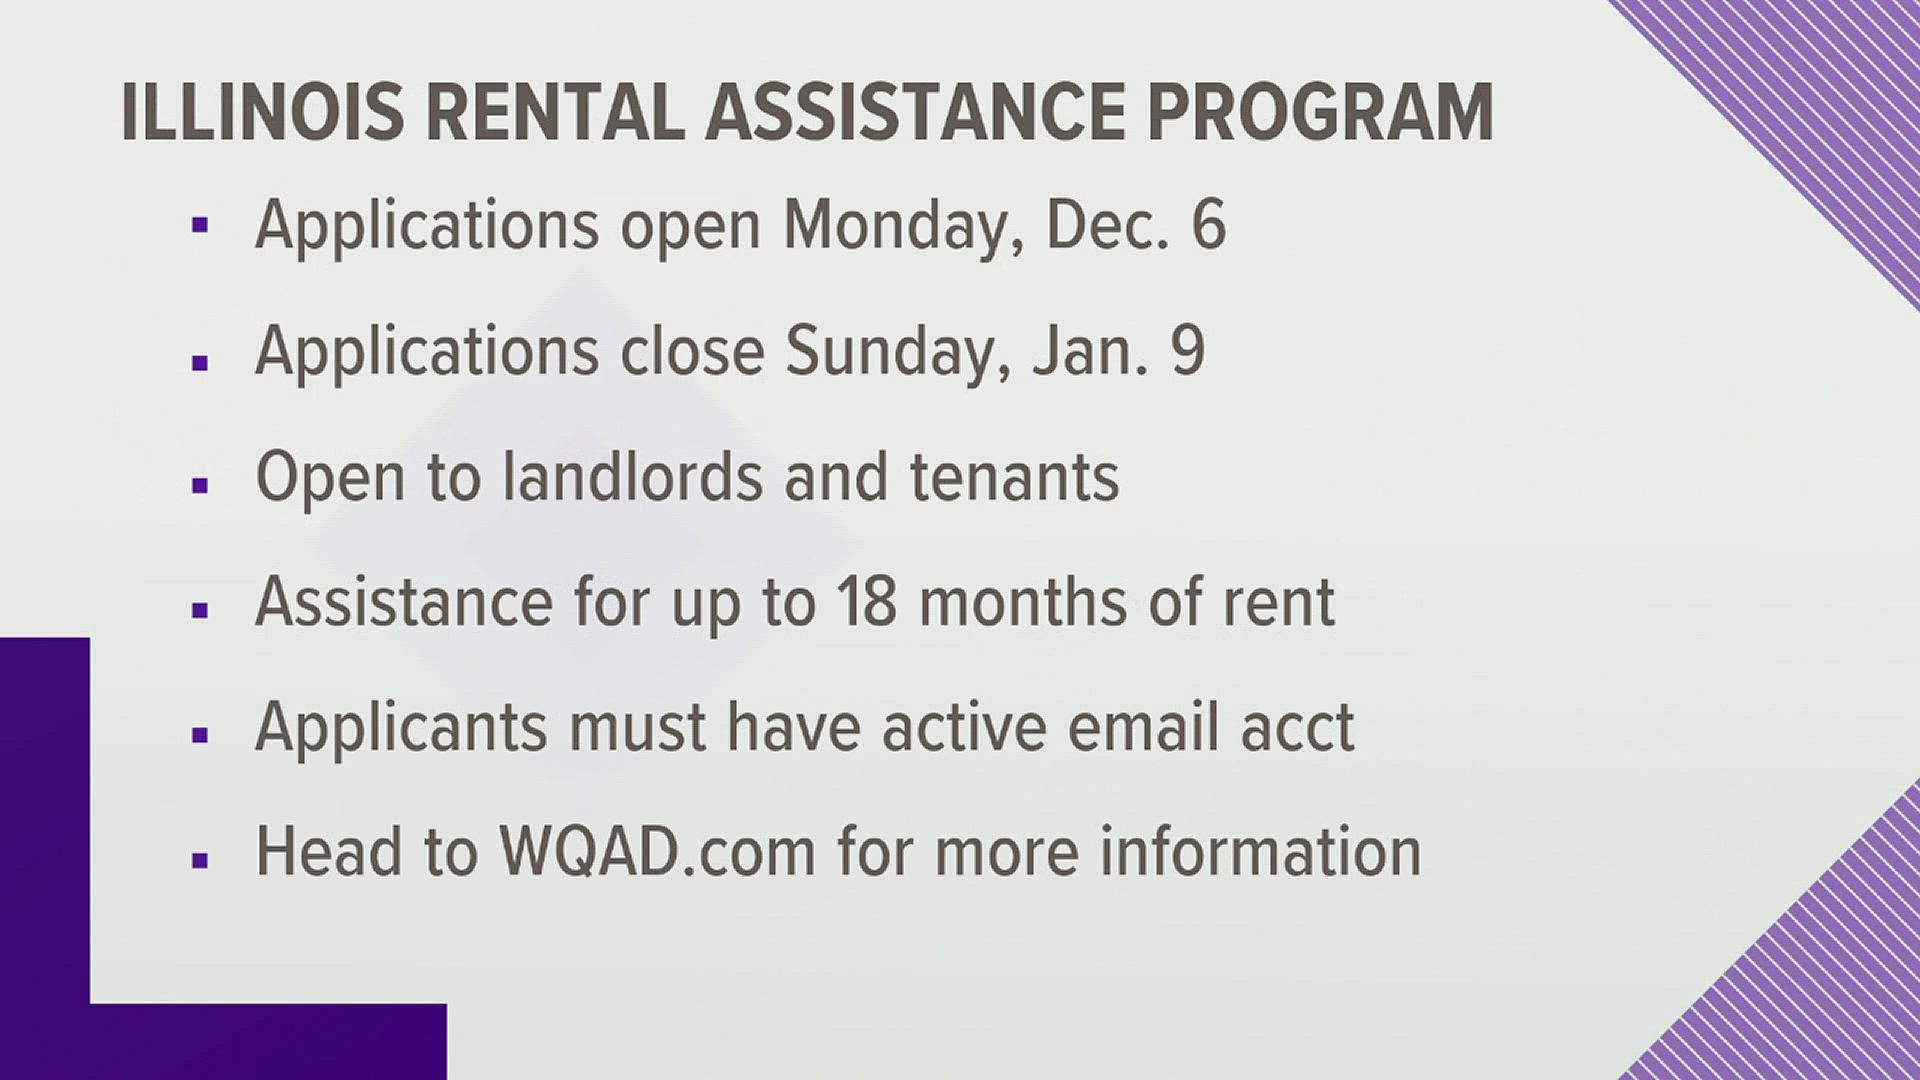 The program can help with up to 18 months of missed rent during the pandemic for people who qualify.